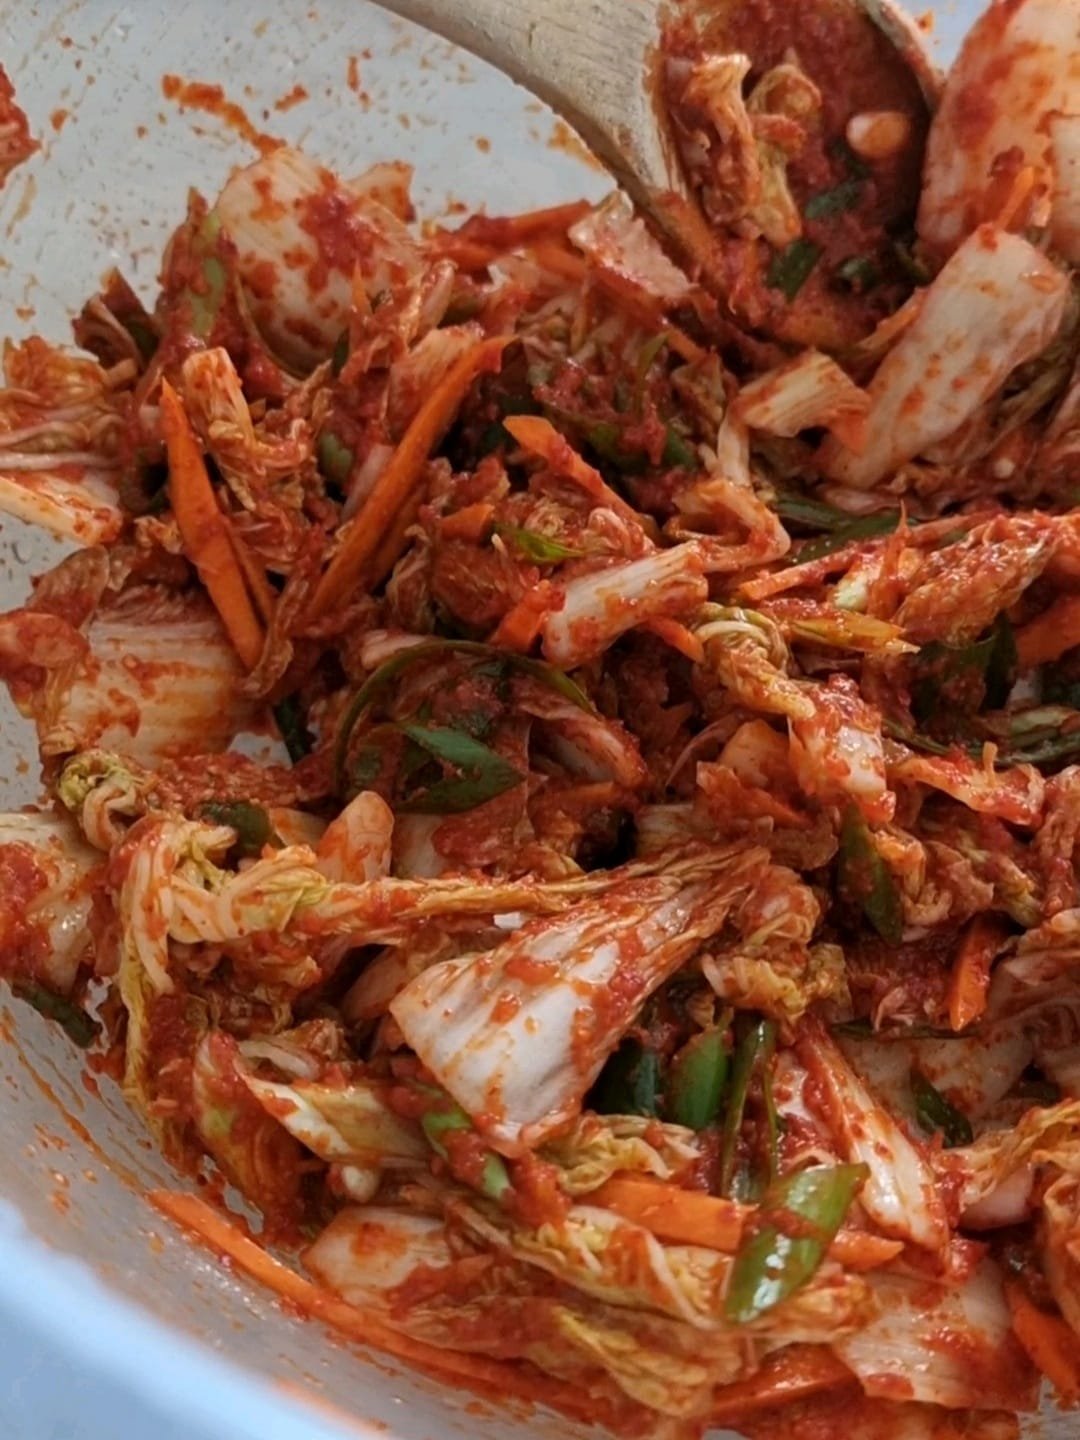 add the sliced cabbage to the rest of the vegetables. Your Kimchi is basically reday